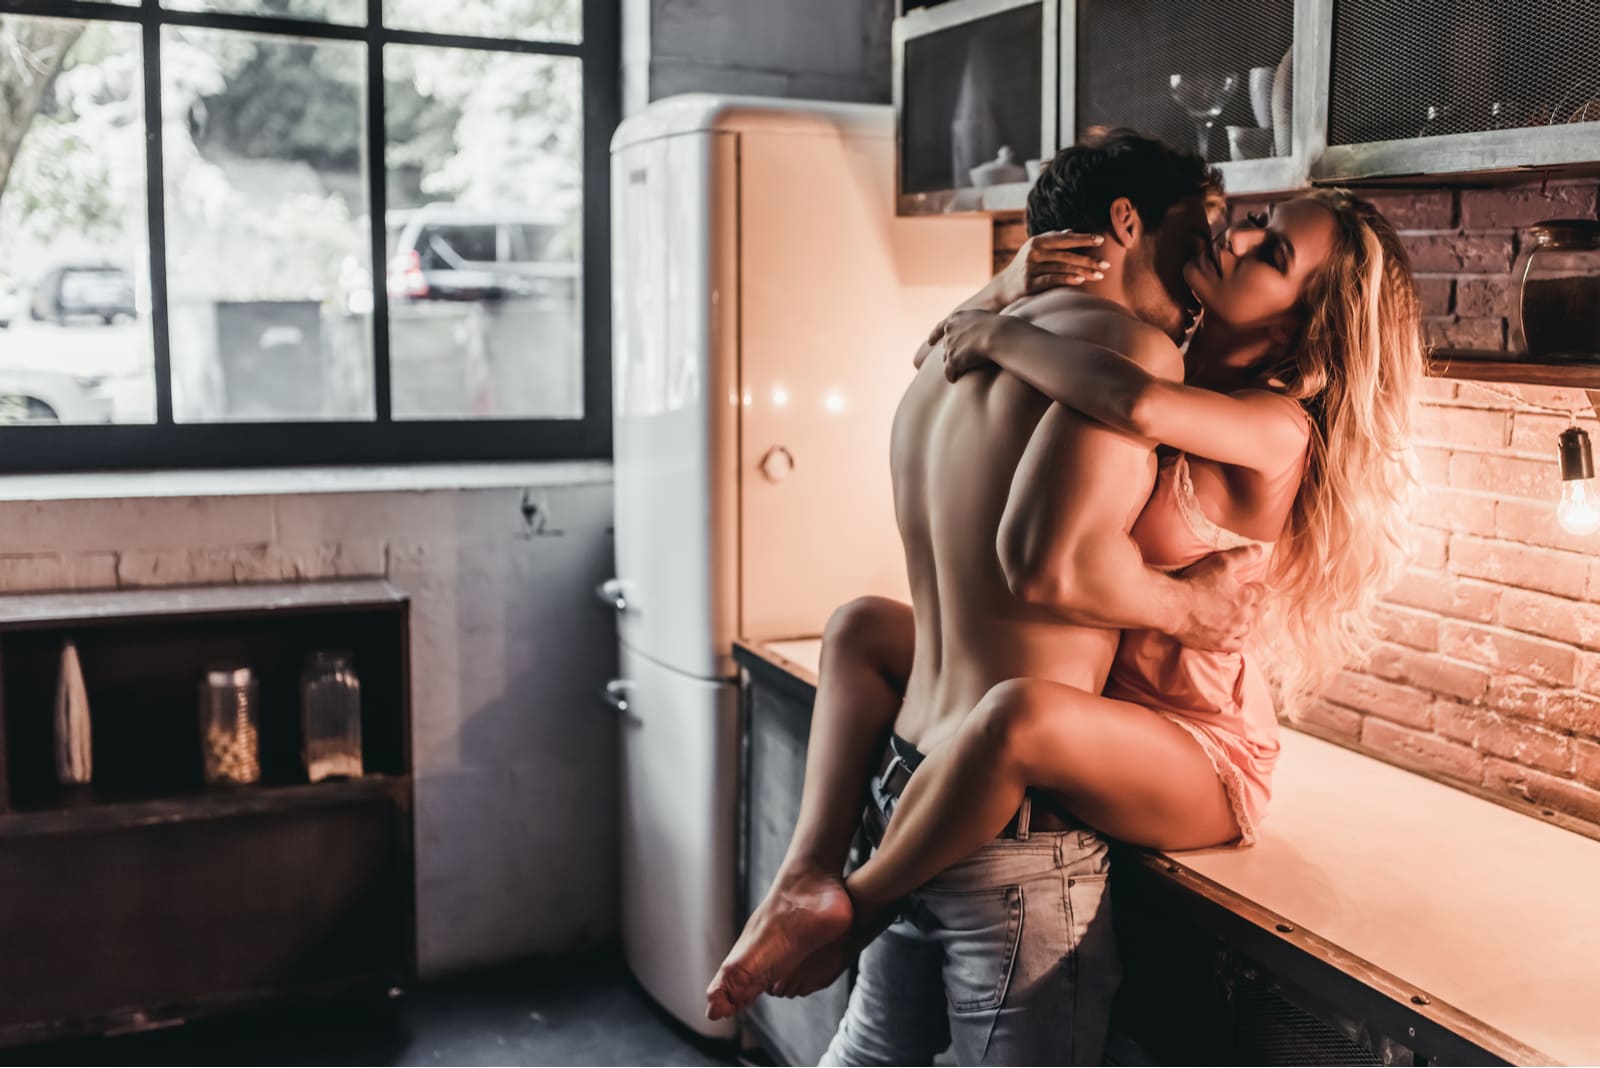 in the kitchen the couple has sex